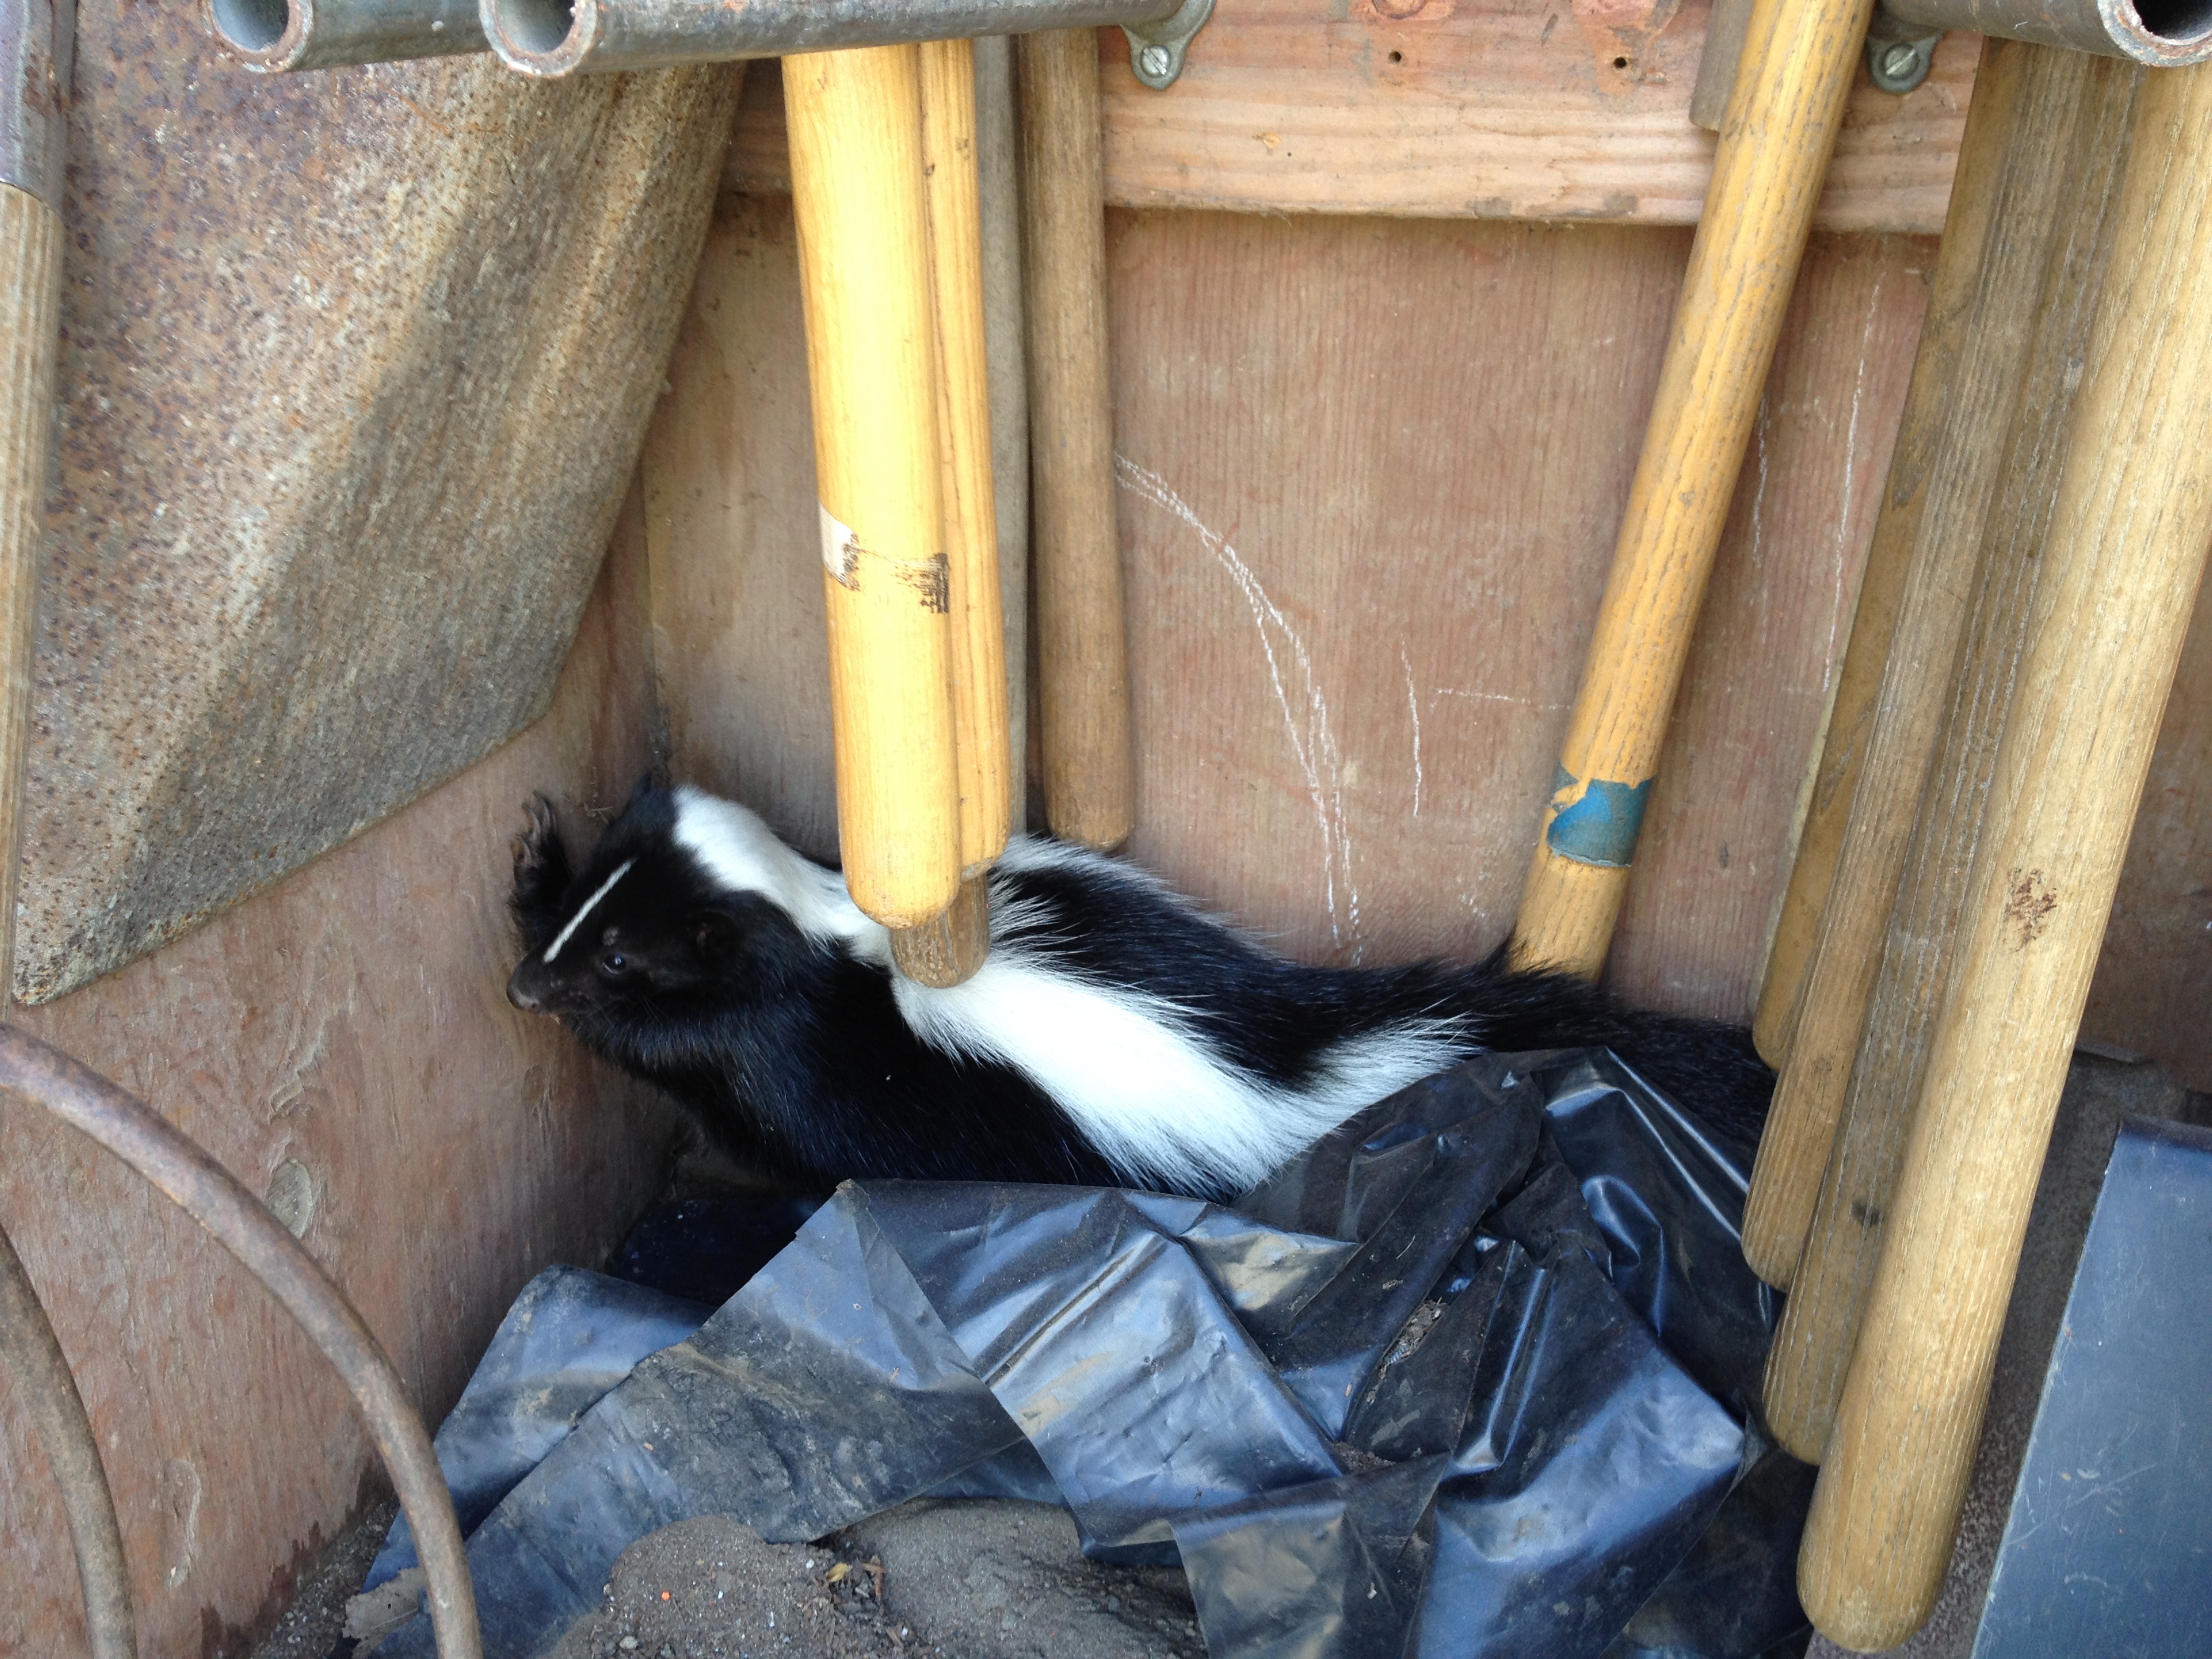 A skunk found at the Horticulture Department area at City College of San Francisco, Ocean Campus. Often hiding during bright daylight, they shoot a sulfur smell spray as a self-defense. Skunks may carry rabies and only spray each other during mating season.   Courtesy: Environmental & Horticulture/Floristry Department Instructor Thomas Wang